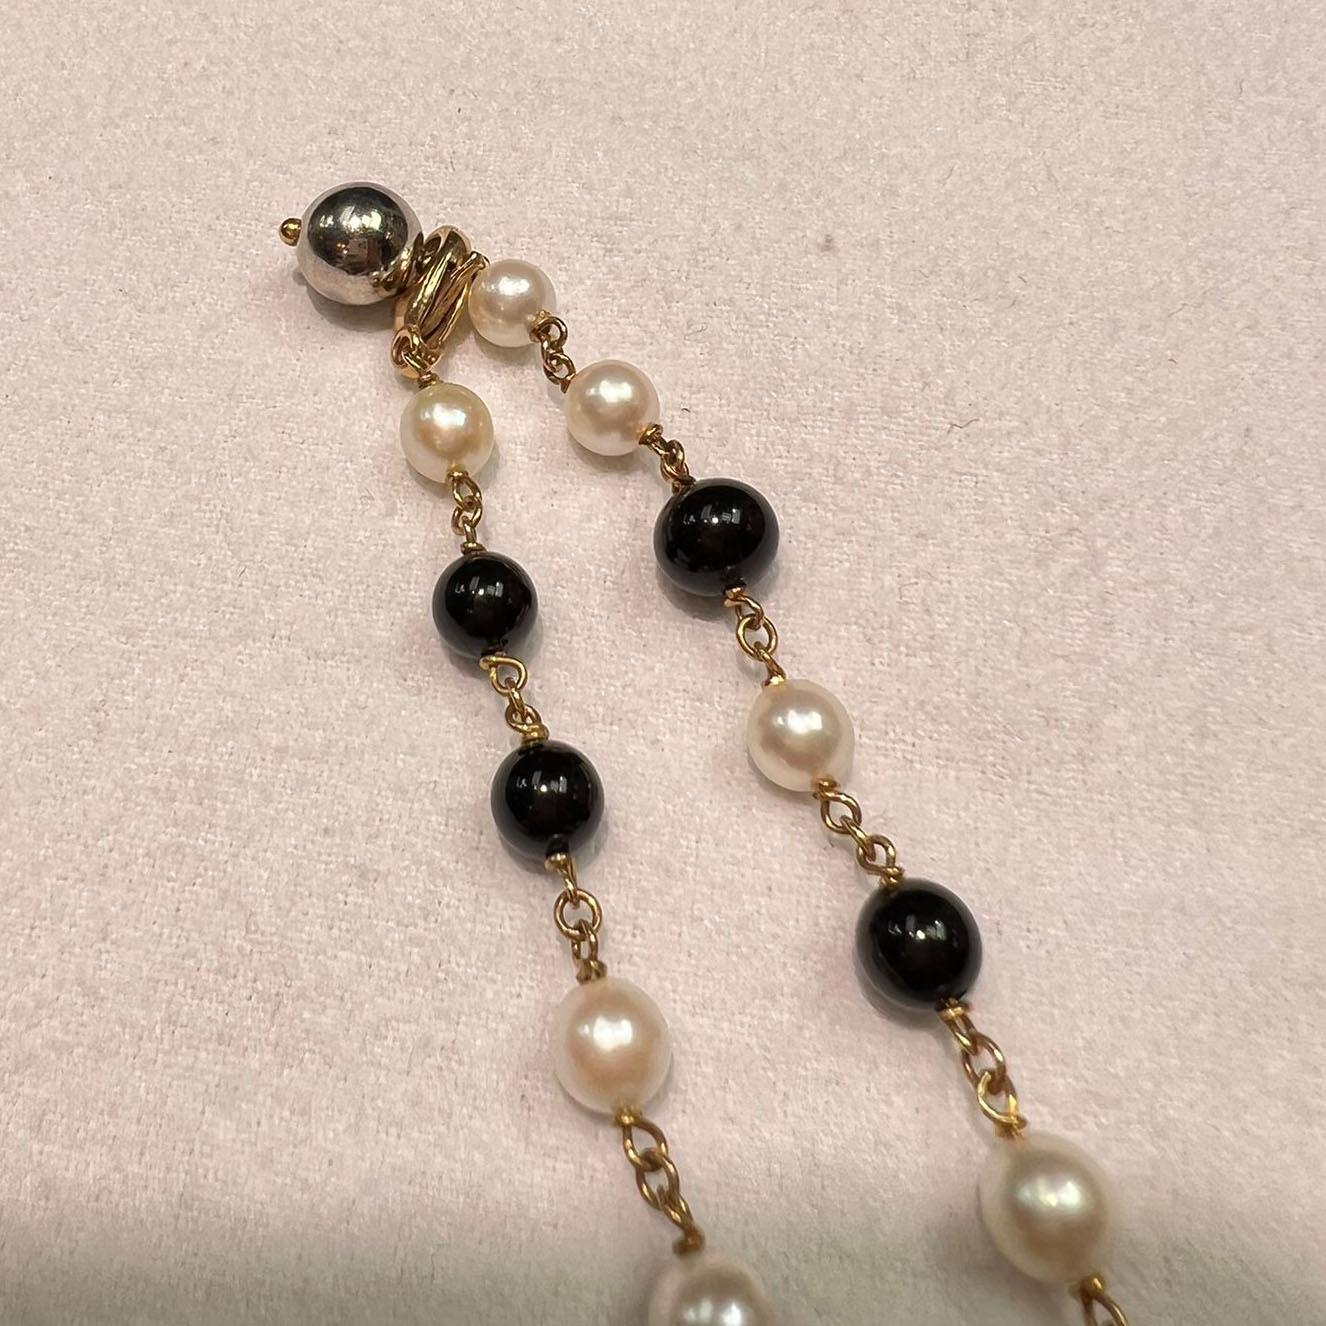 Onyx and Akoya Pearls with Silver Chain and Silver Clasp For Sale 1